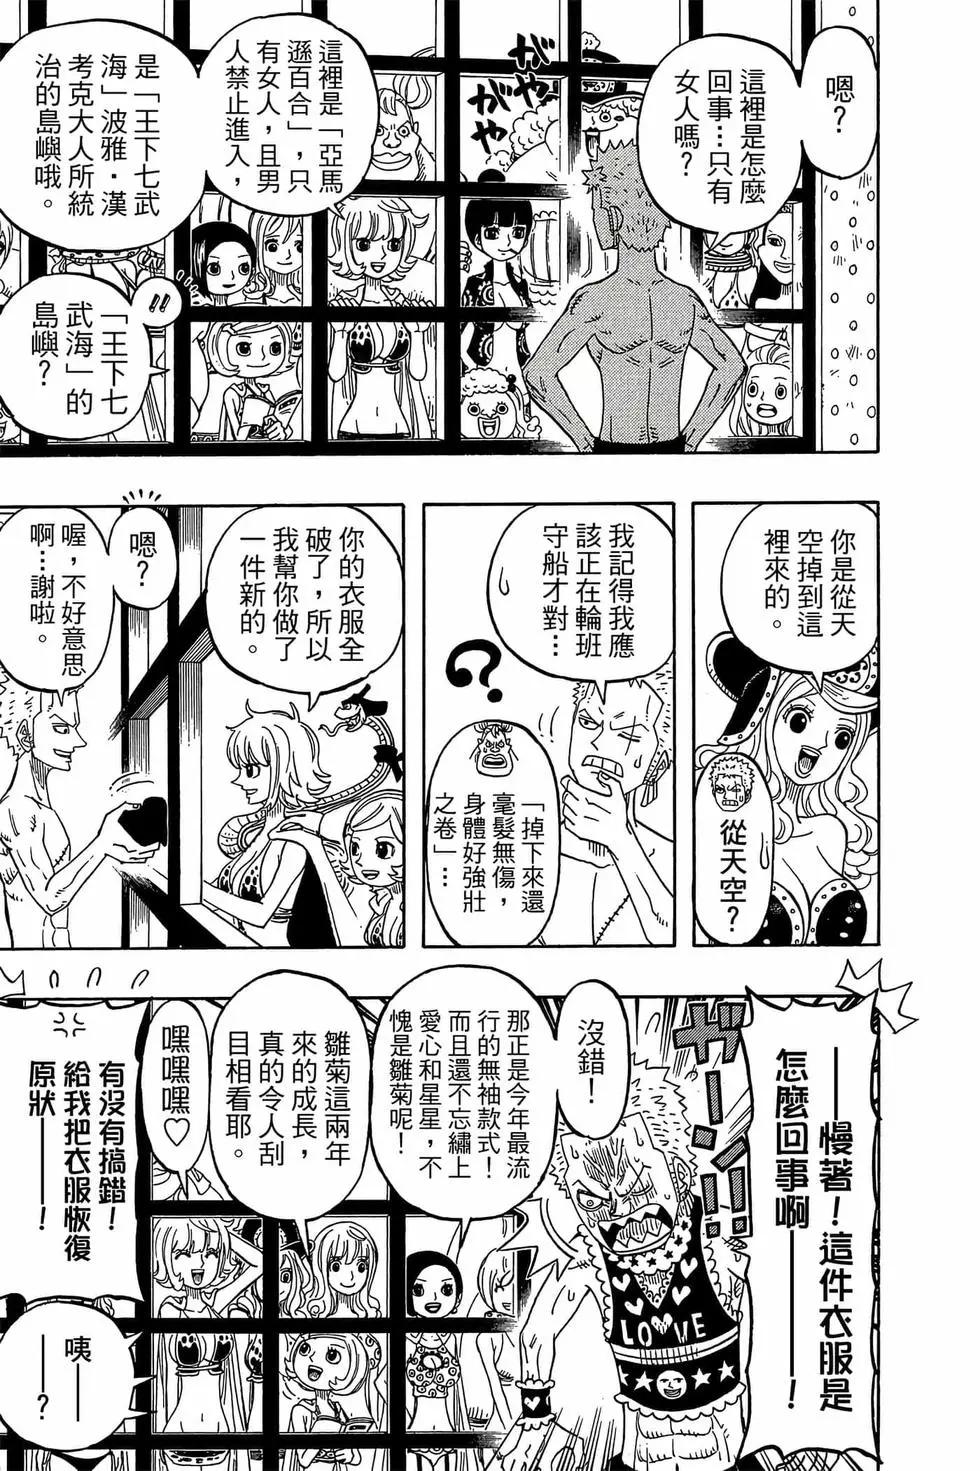 One piece party - 第02卷(1/4) - 8